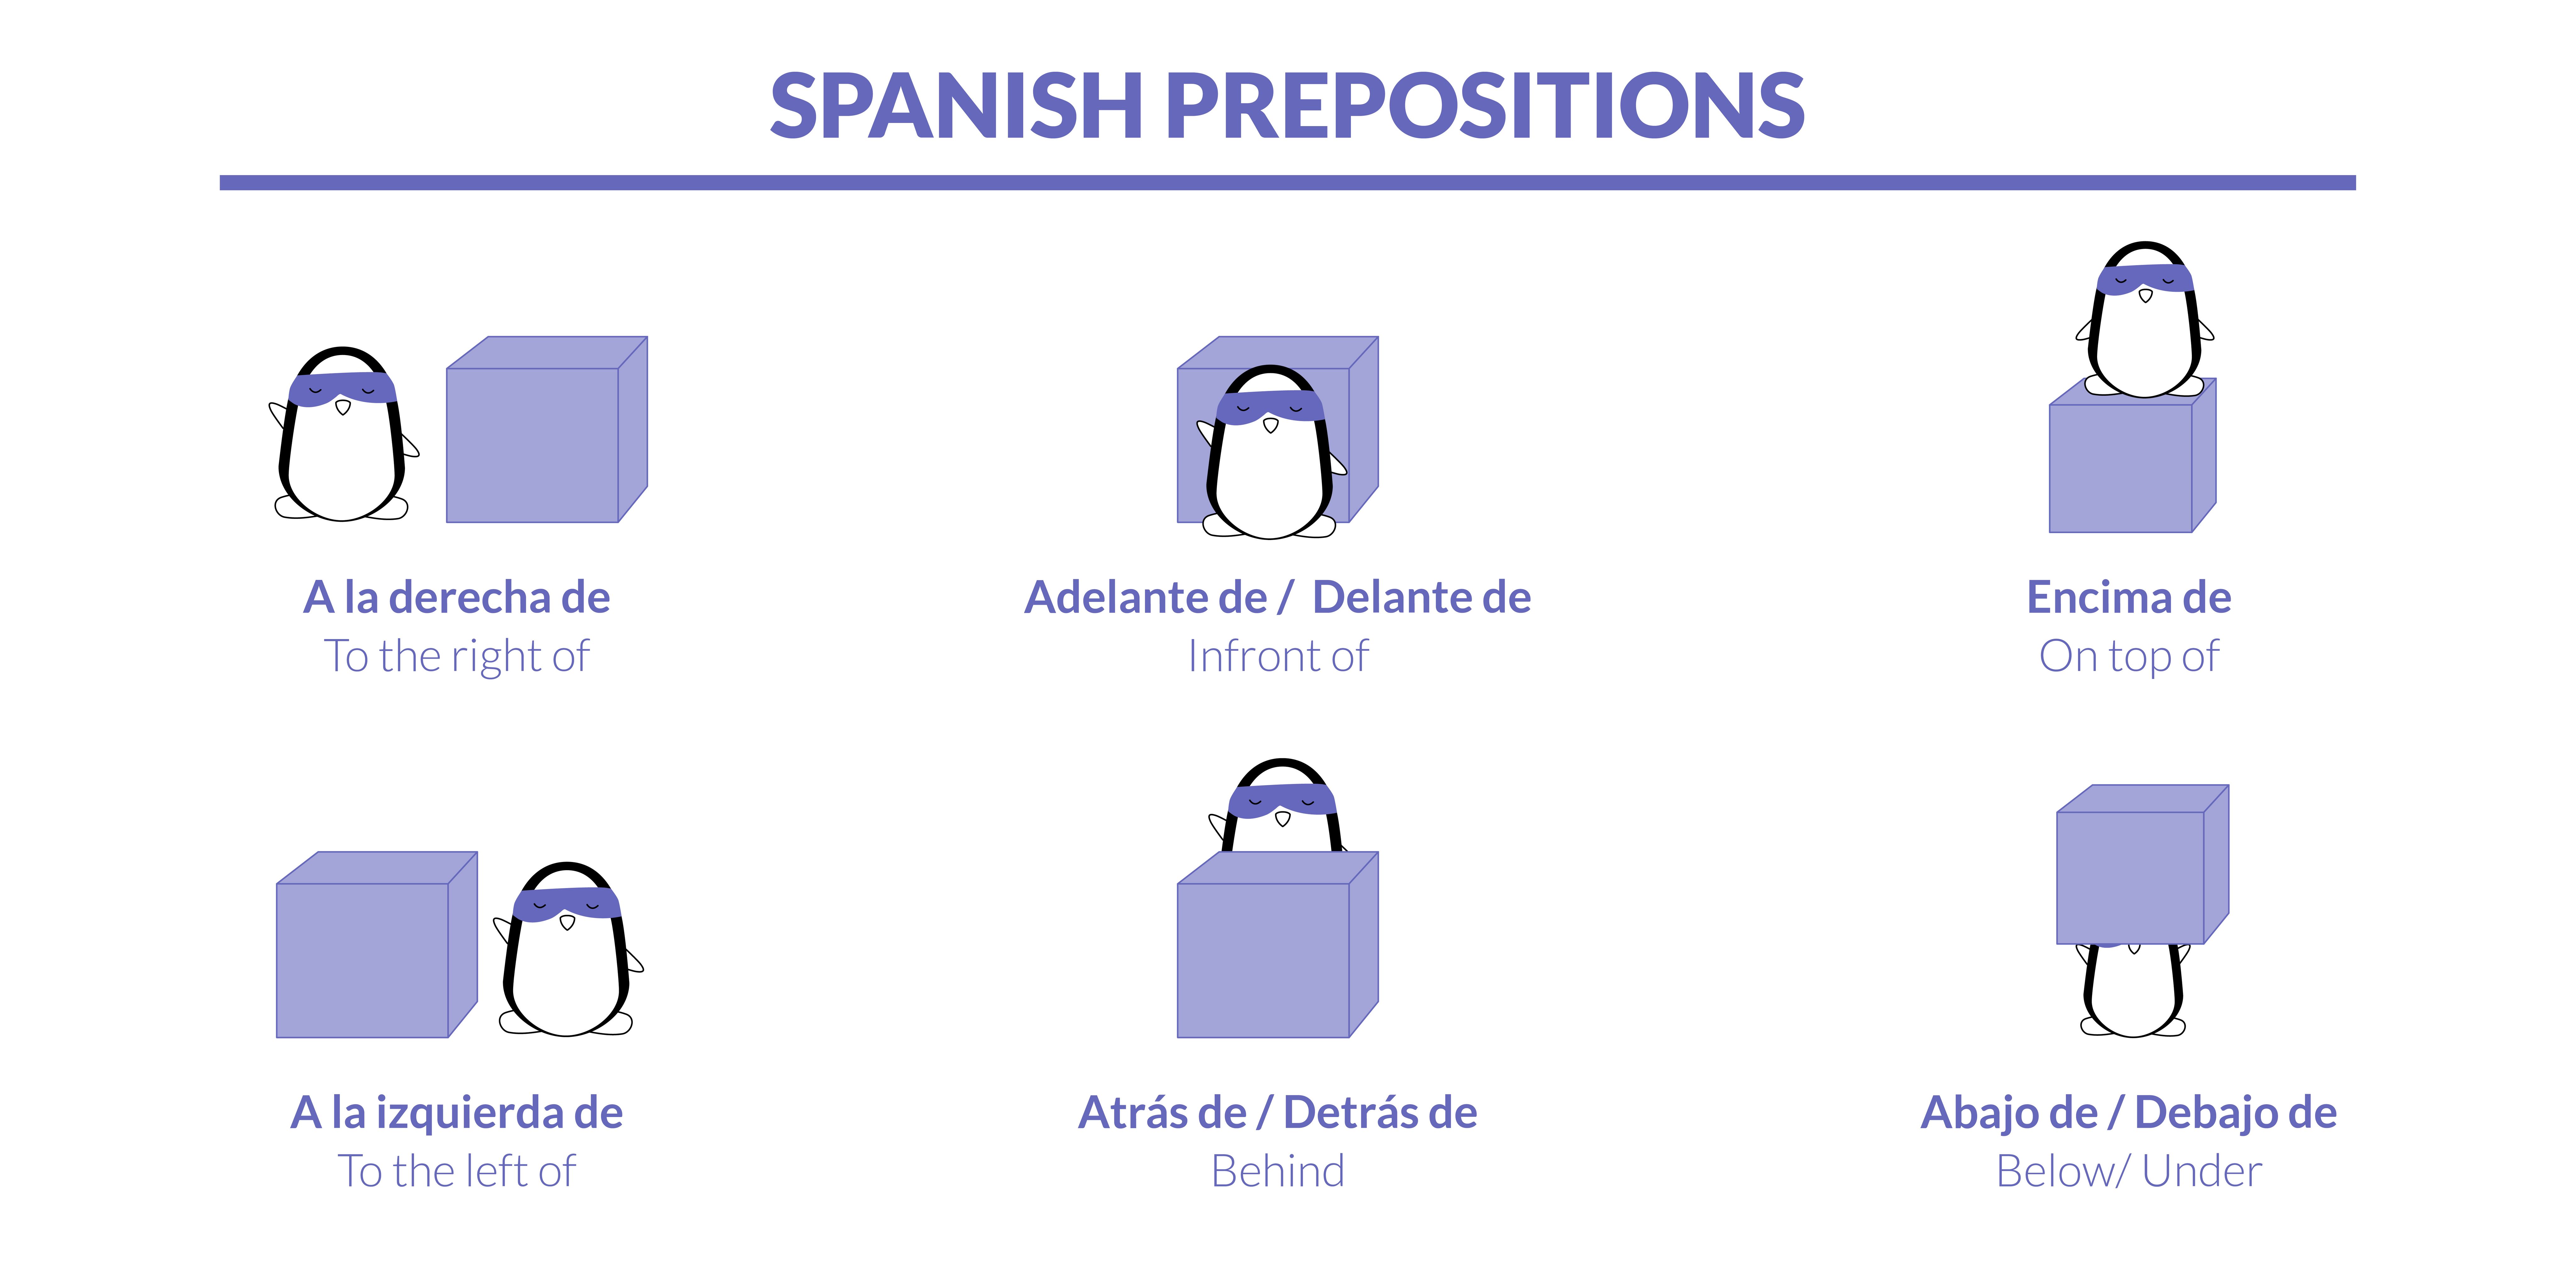 A drawing that illustrates Spanish prepositions.